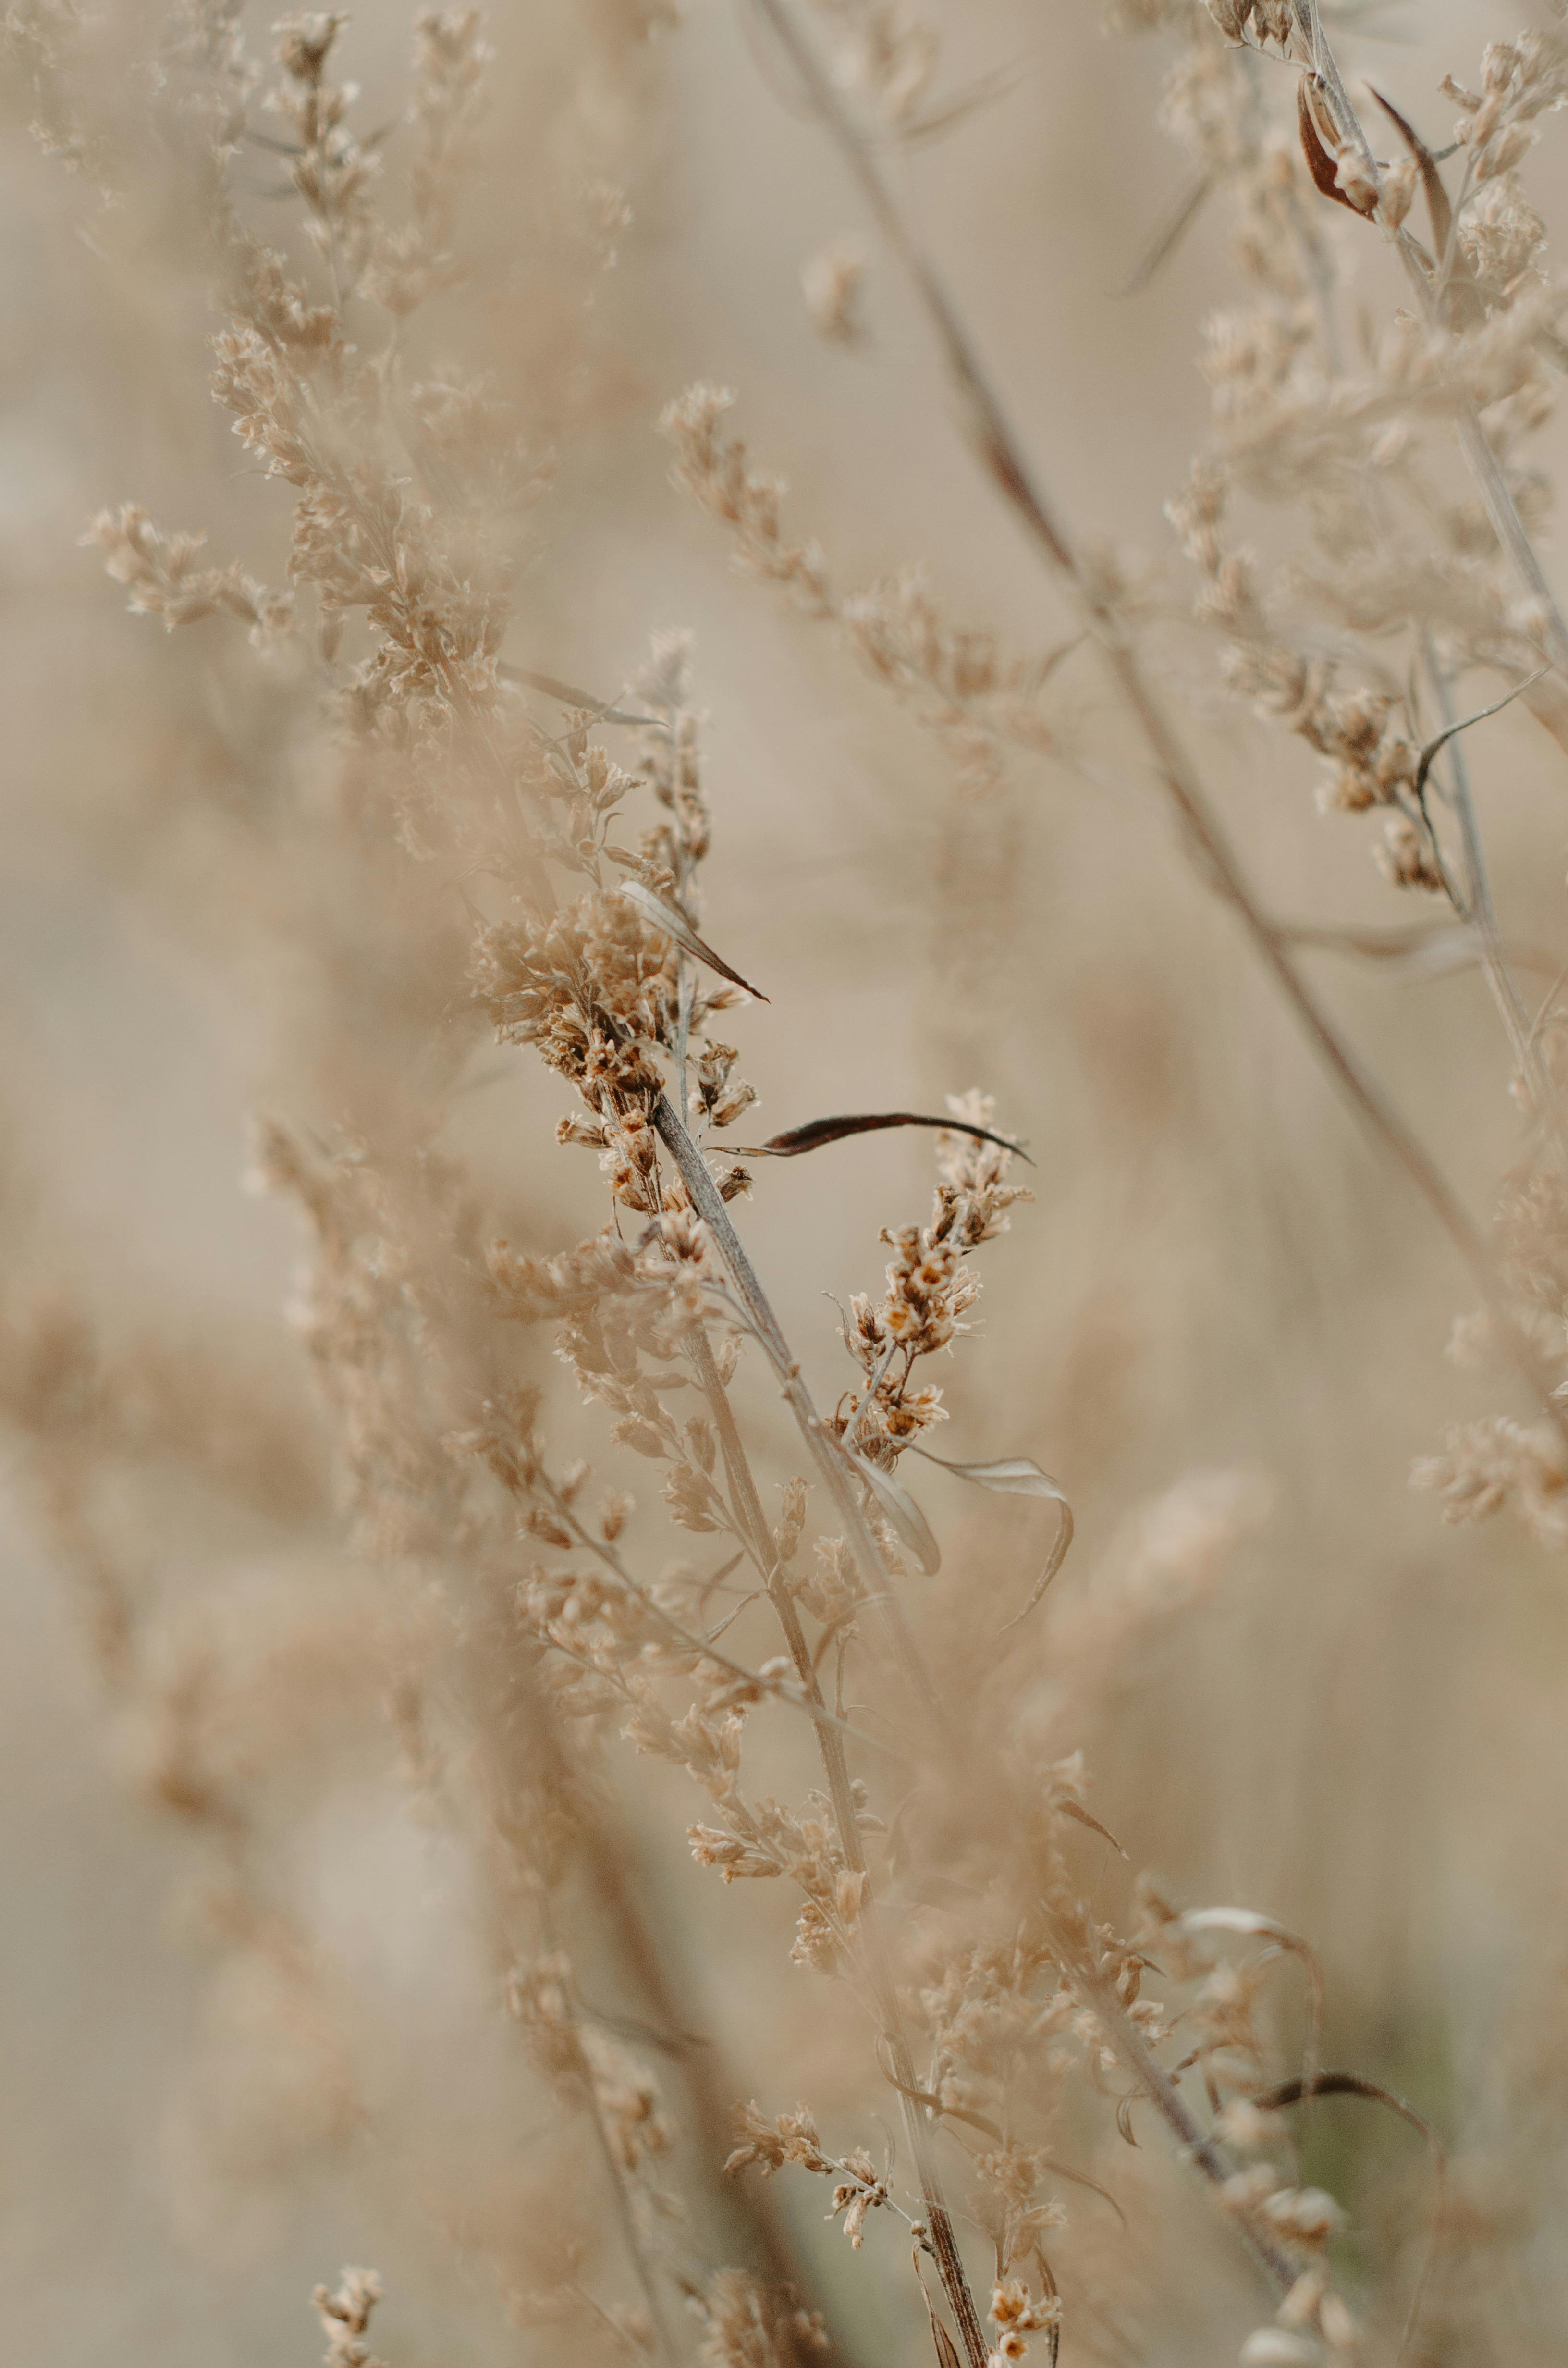 flowers of dry grass in close up photography